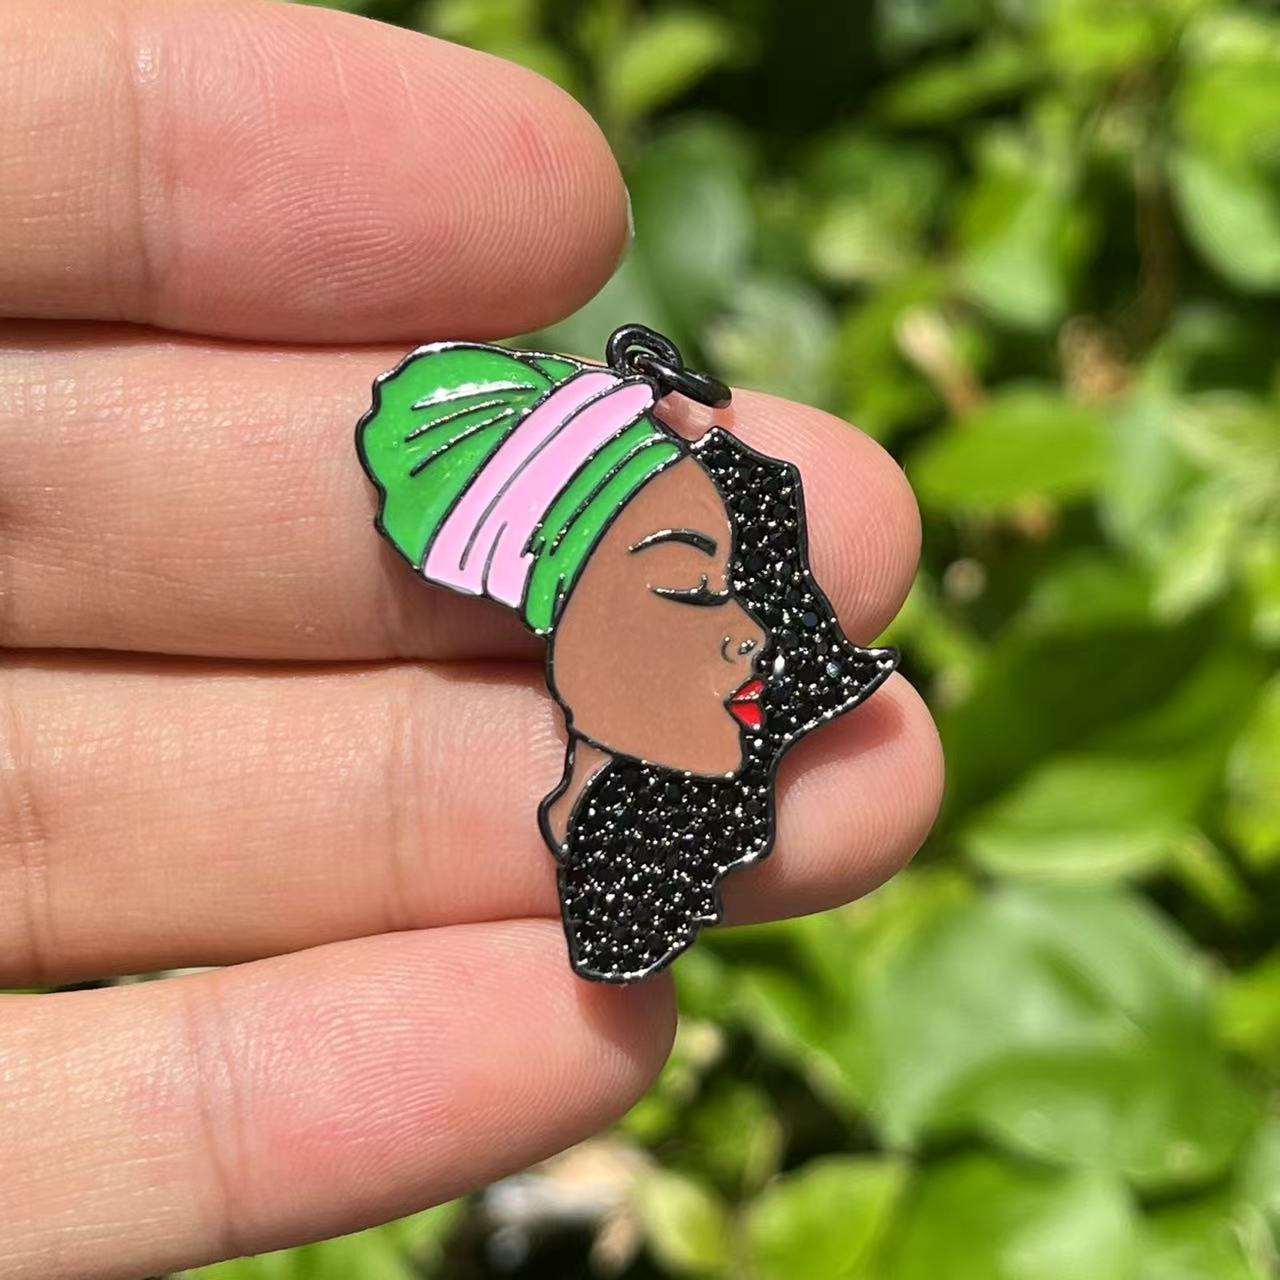 5PCS Africa Map Pendant with Cubic Zirconia Accent - Flexi Africa - Flexi Africa offers Free Delivery Worldwide - Vibrant African traditional clothing showcasing bold prints and intricate designs